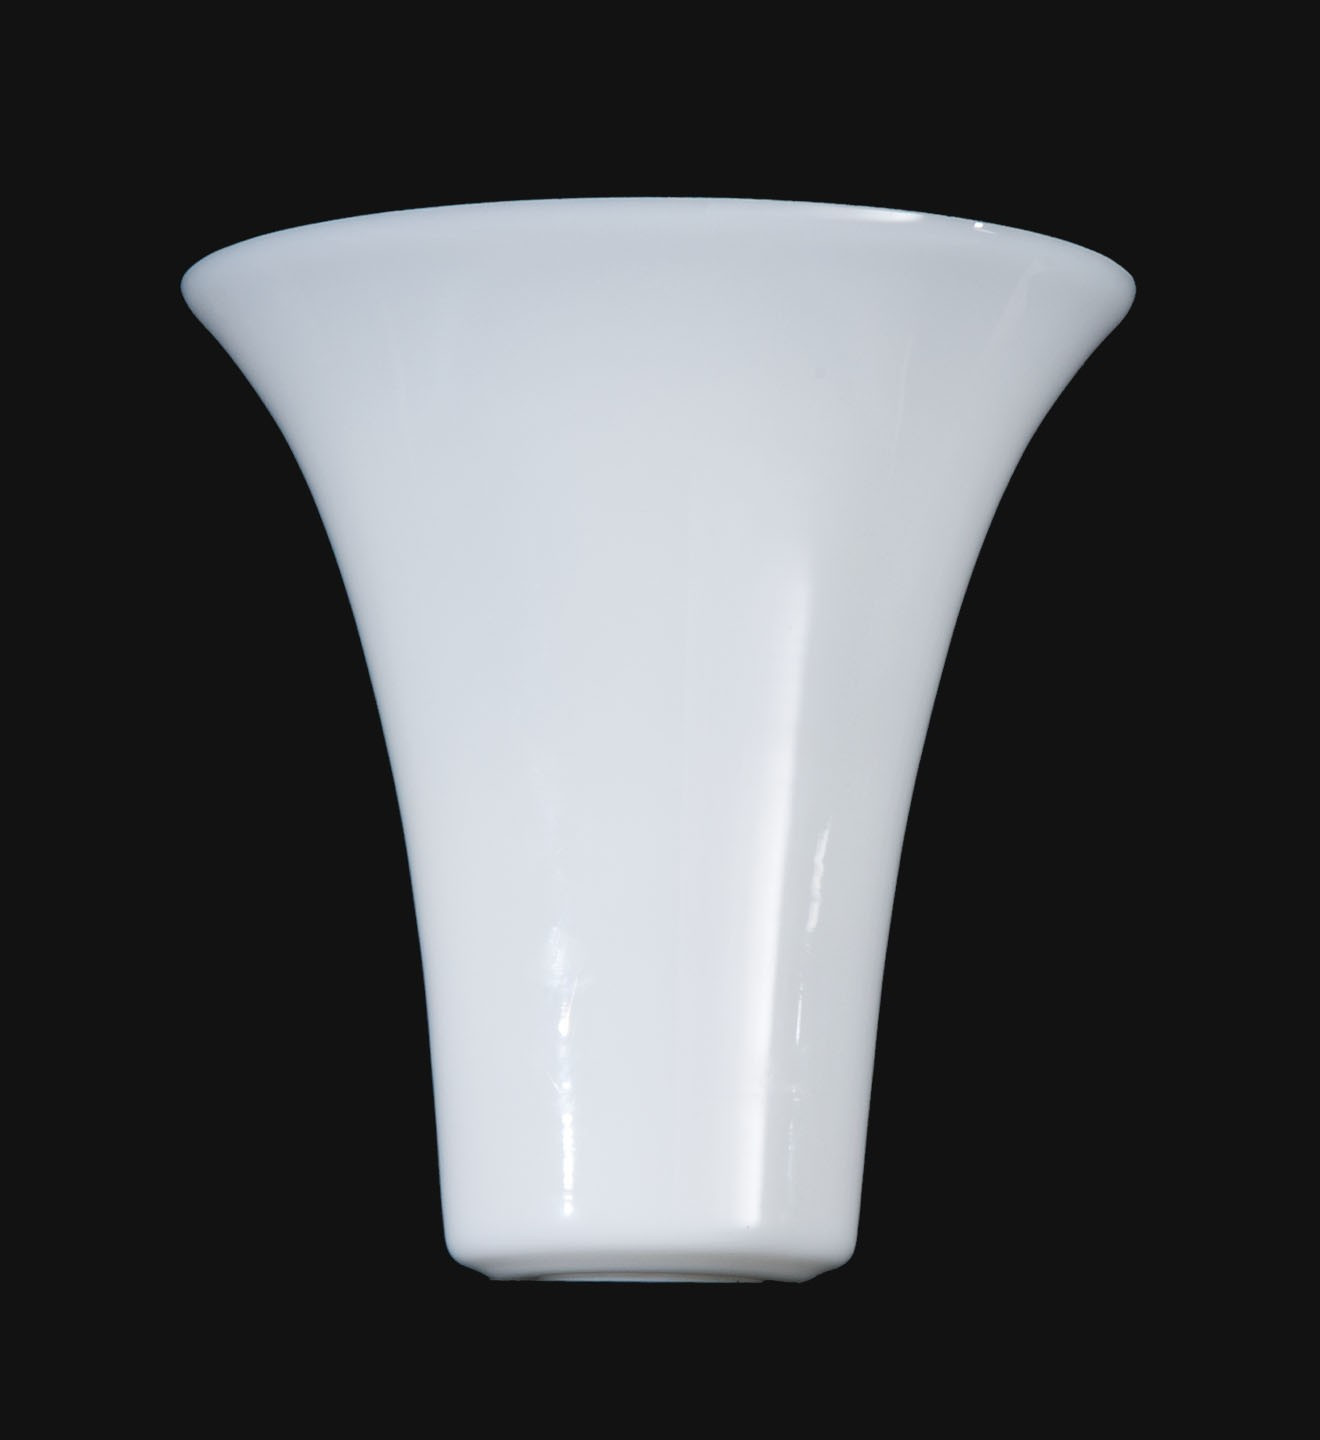 15 Stylish Antique Milk Glass Vases 2023 free download antique milk glass vases of opal glass tulip shaped torchiere shade 3 1 4 o d x 1 5 8 inch regarding opal glass tulip shaped torchiere shade 3 1 4 o d x 1